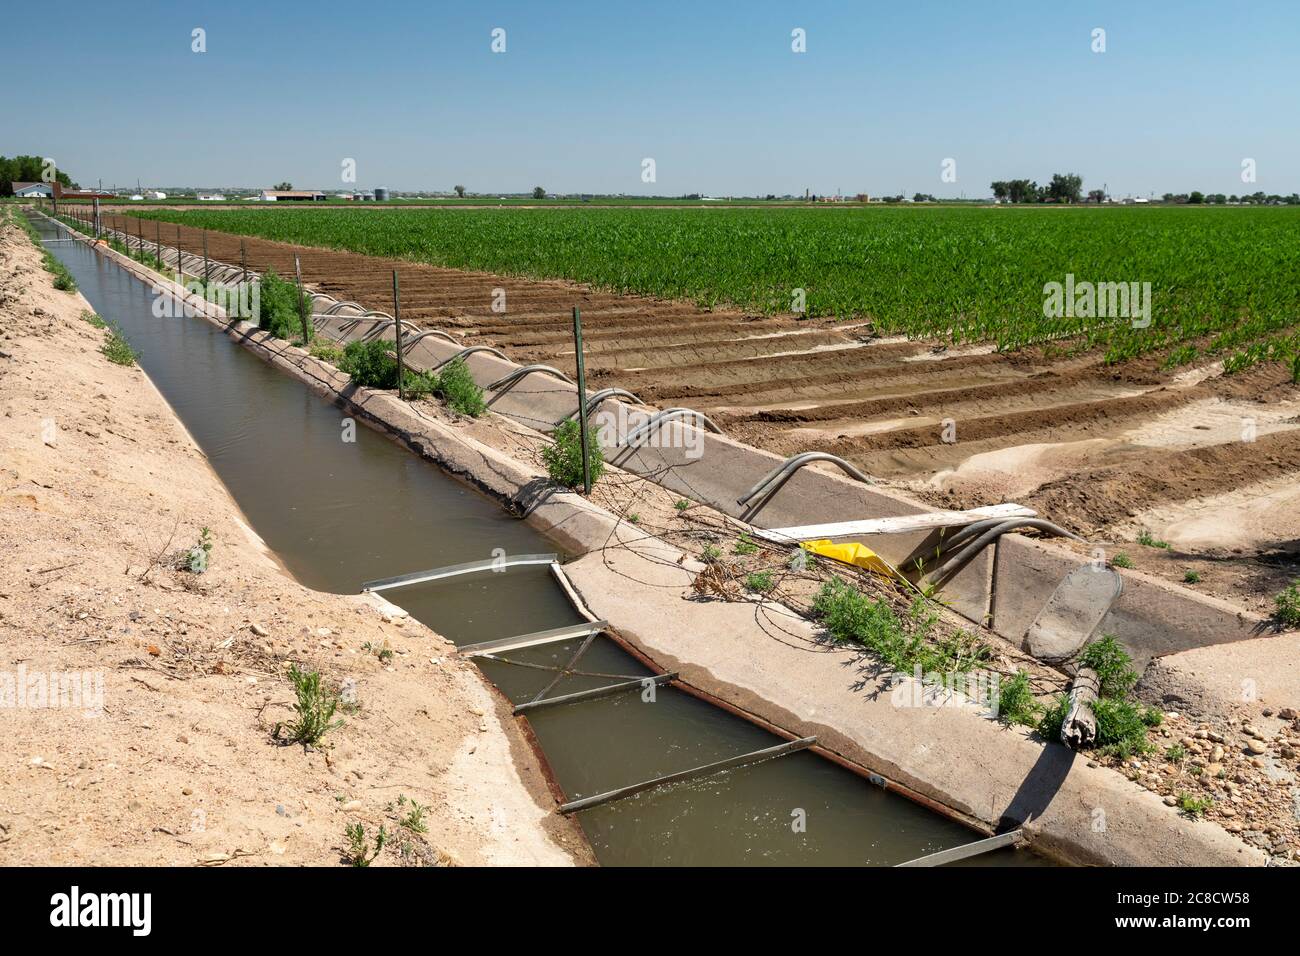 Kersey, Colorado - An irrigation ditch in eastern Colorado's Weld County. The area gets only 15 inches of rain per year, so water for irrigation is di Stock Photo